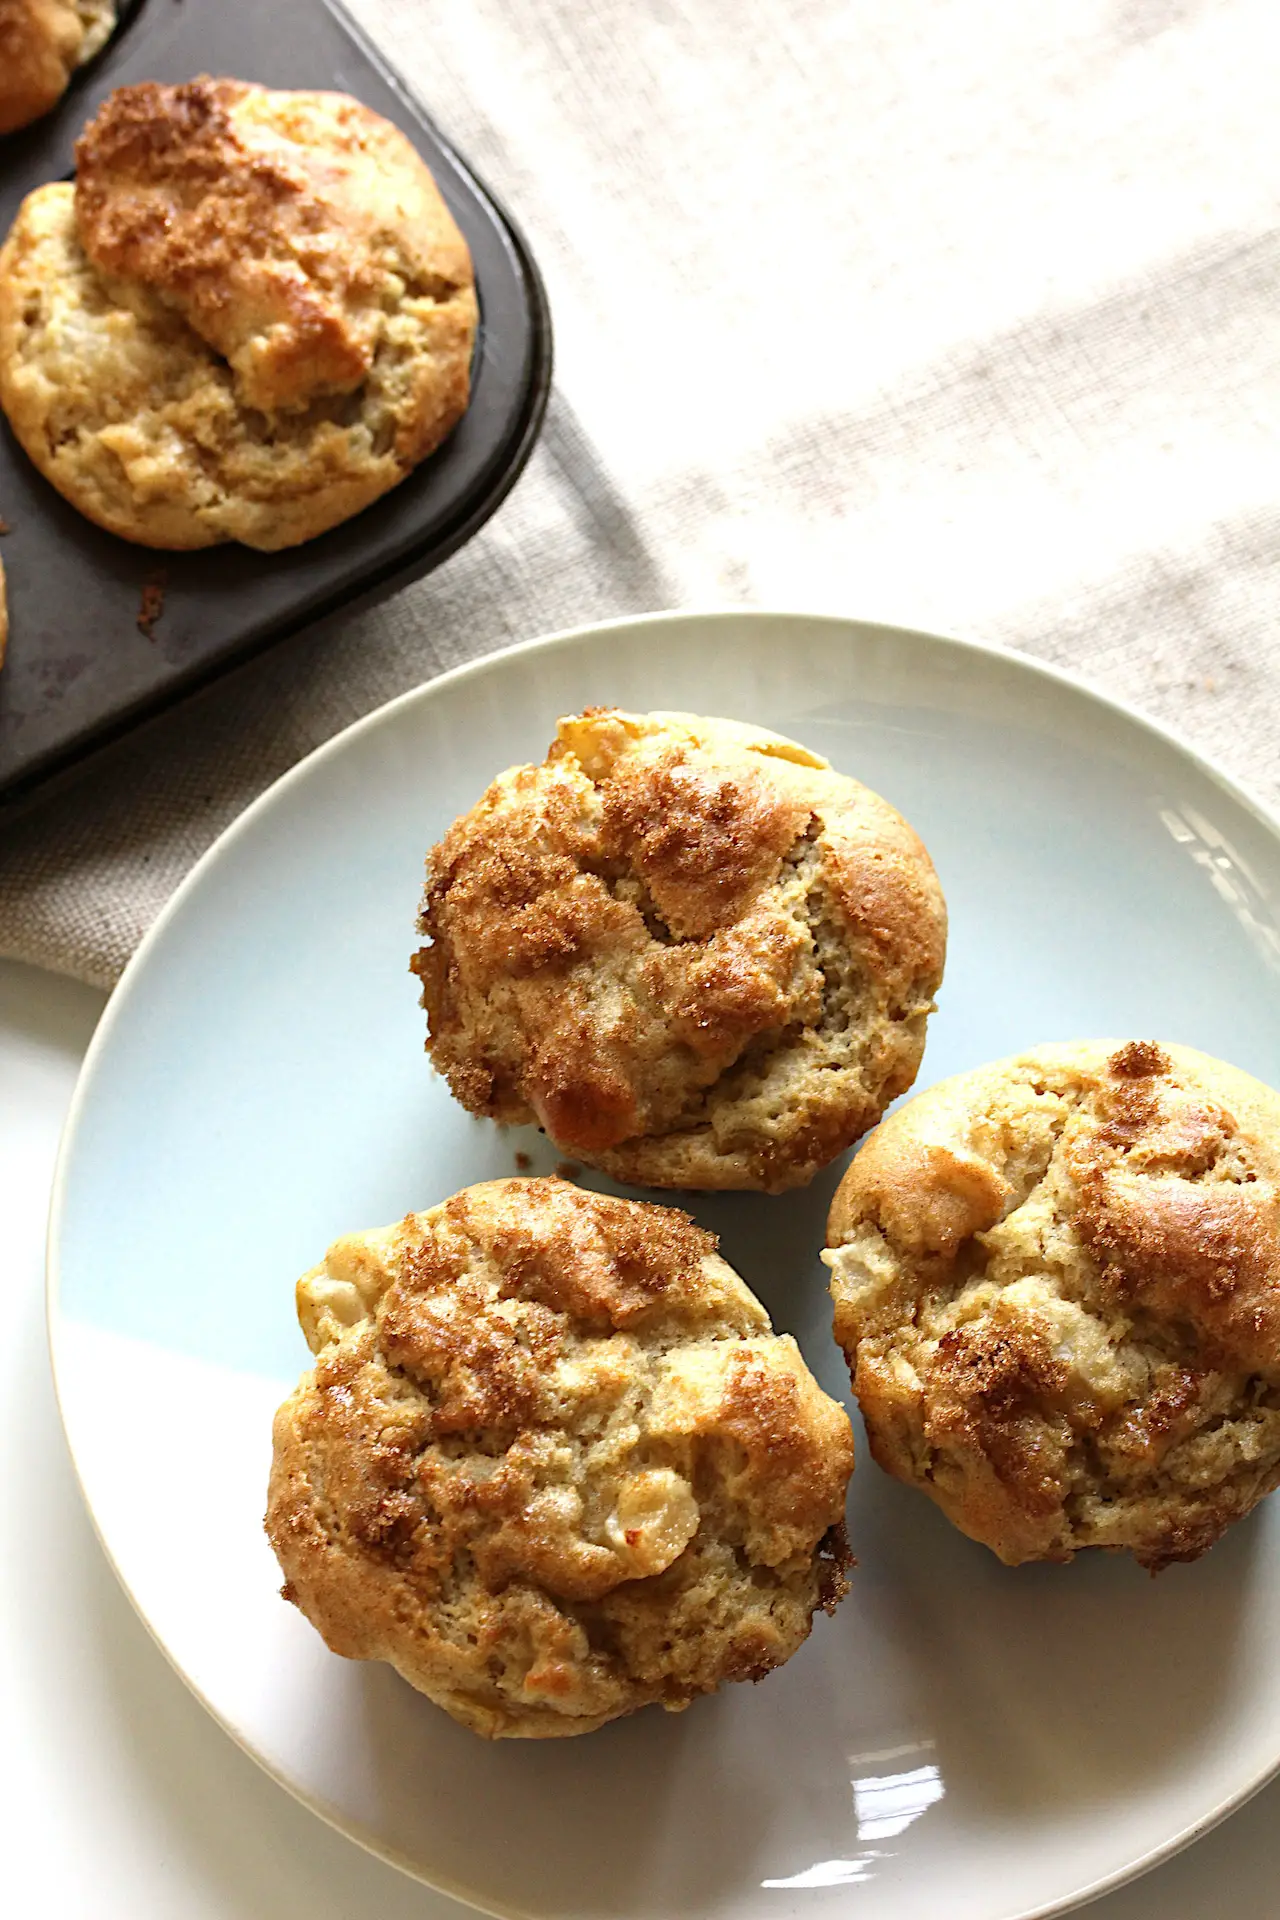 image of three gluten-free pear cardamom muffins on a plate